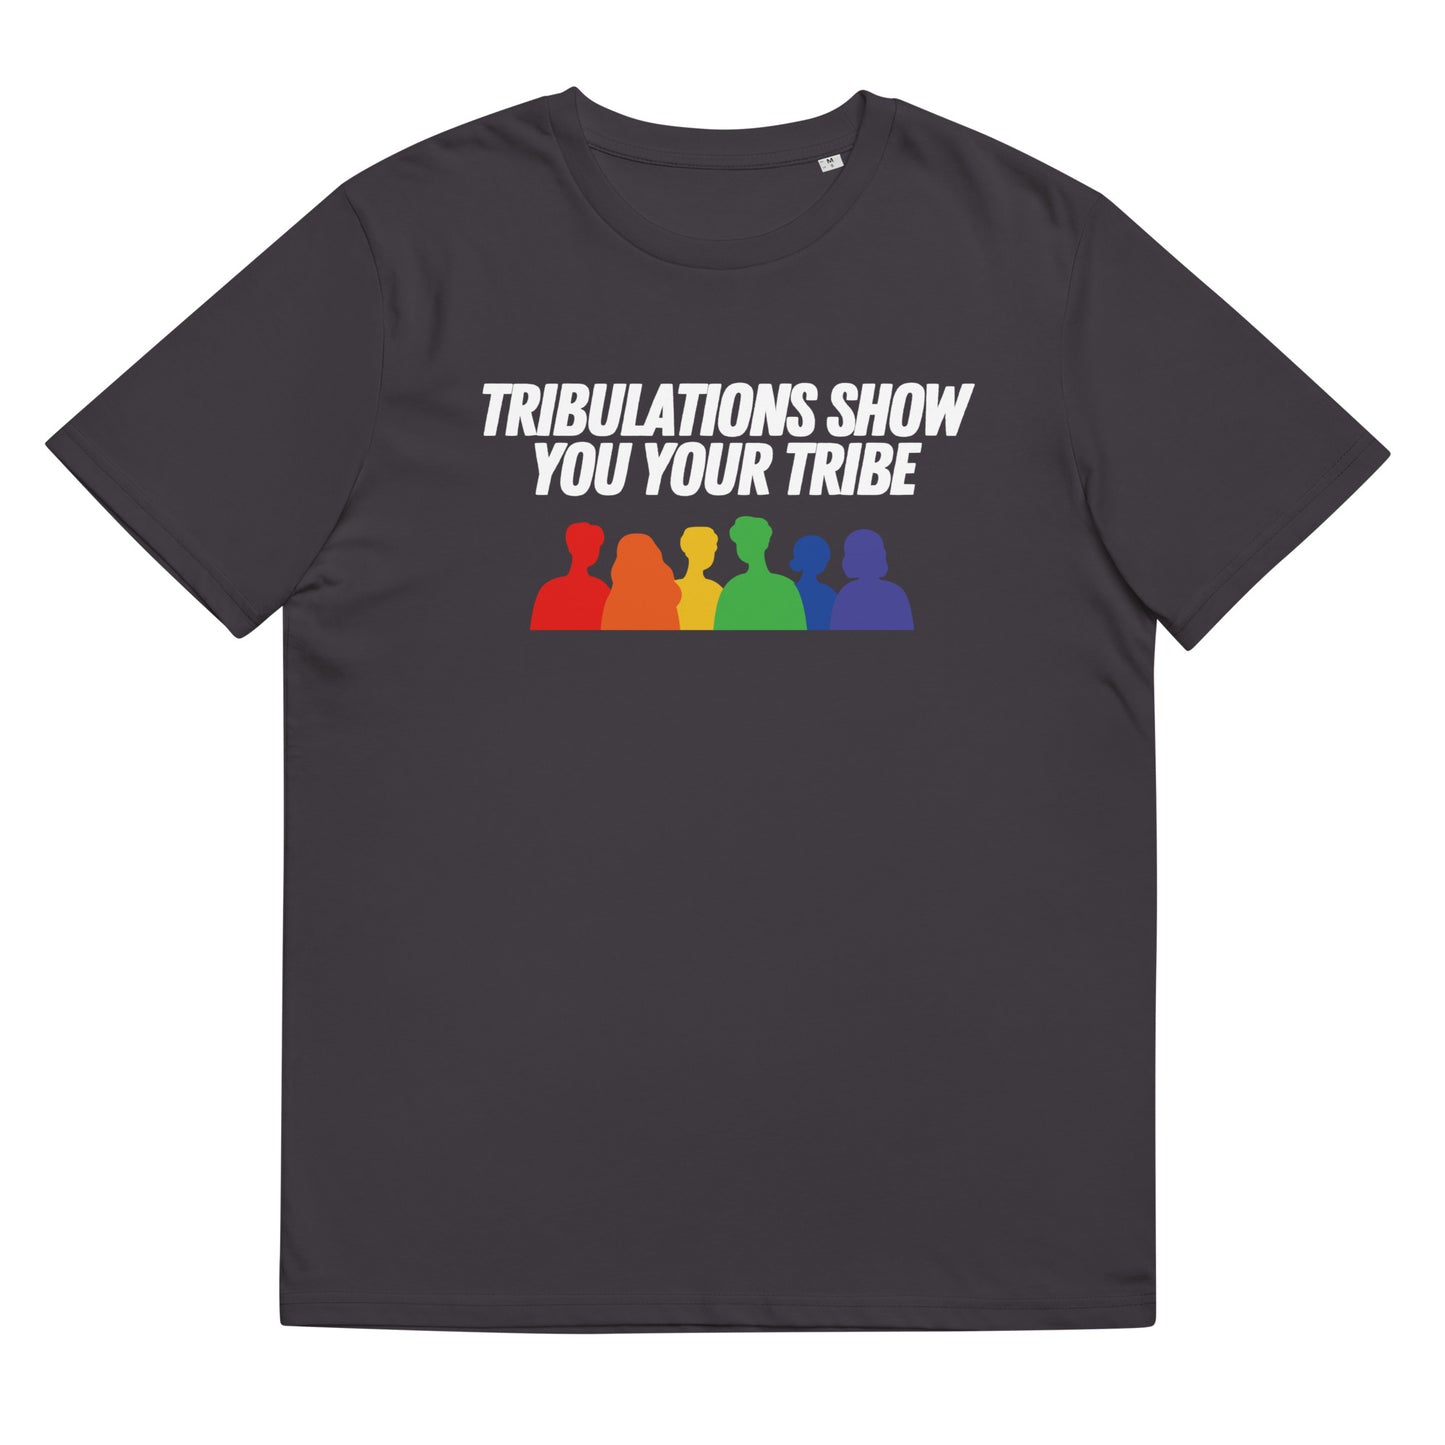 "Your Tribe" Organic Cotton Tee - T-shirt - Inspired by Change